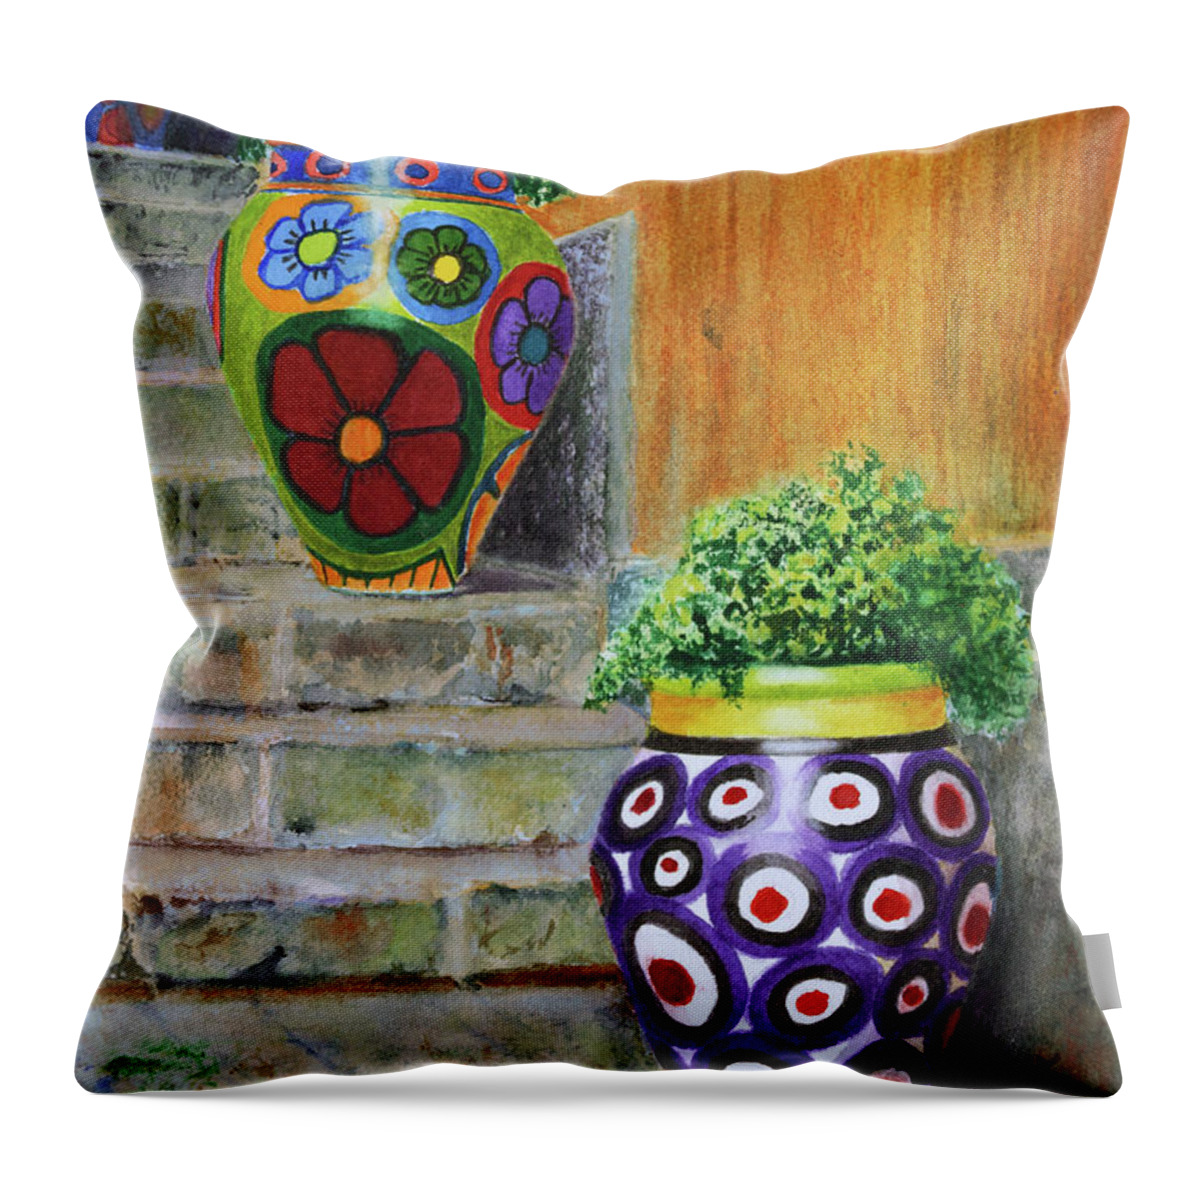 Italy Throw Pillow featuring the painting Italian Vases by Karen Fleschler